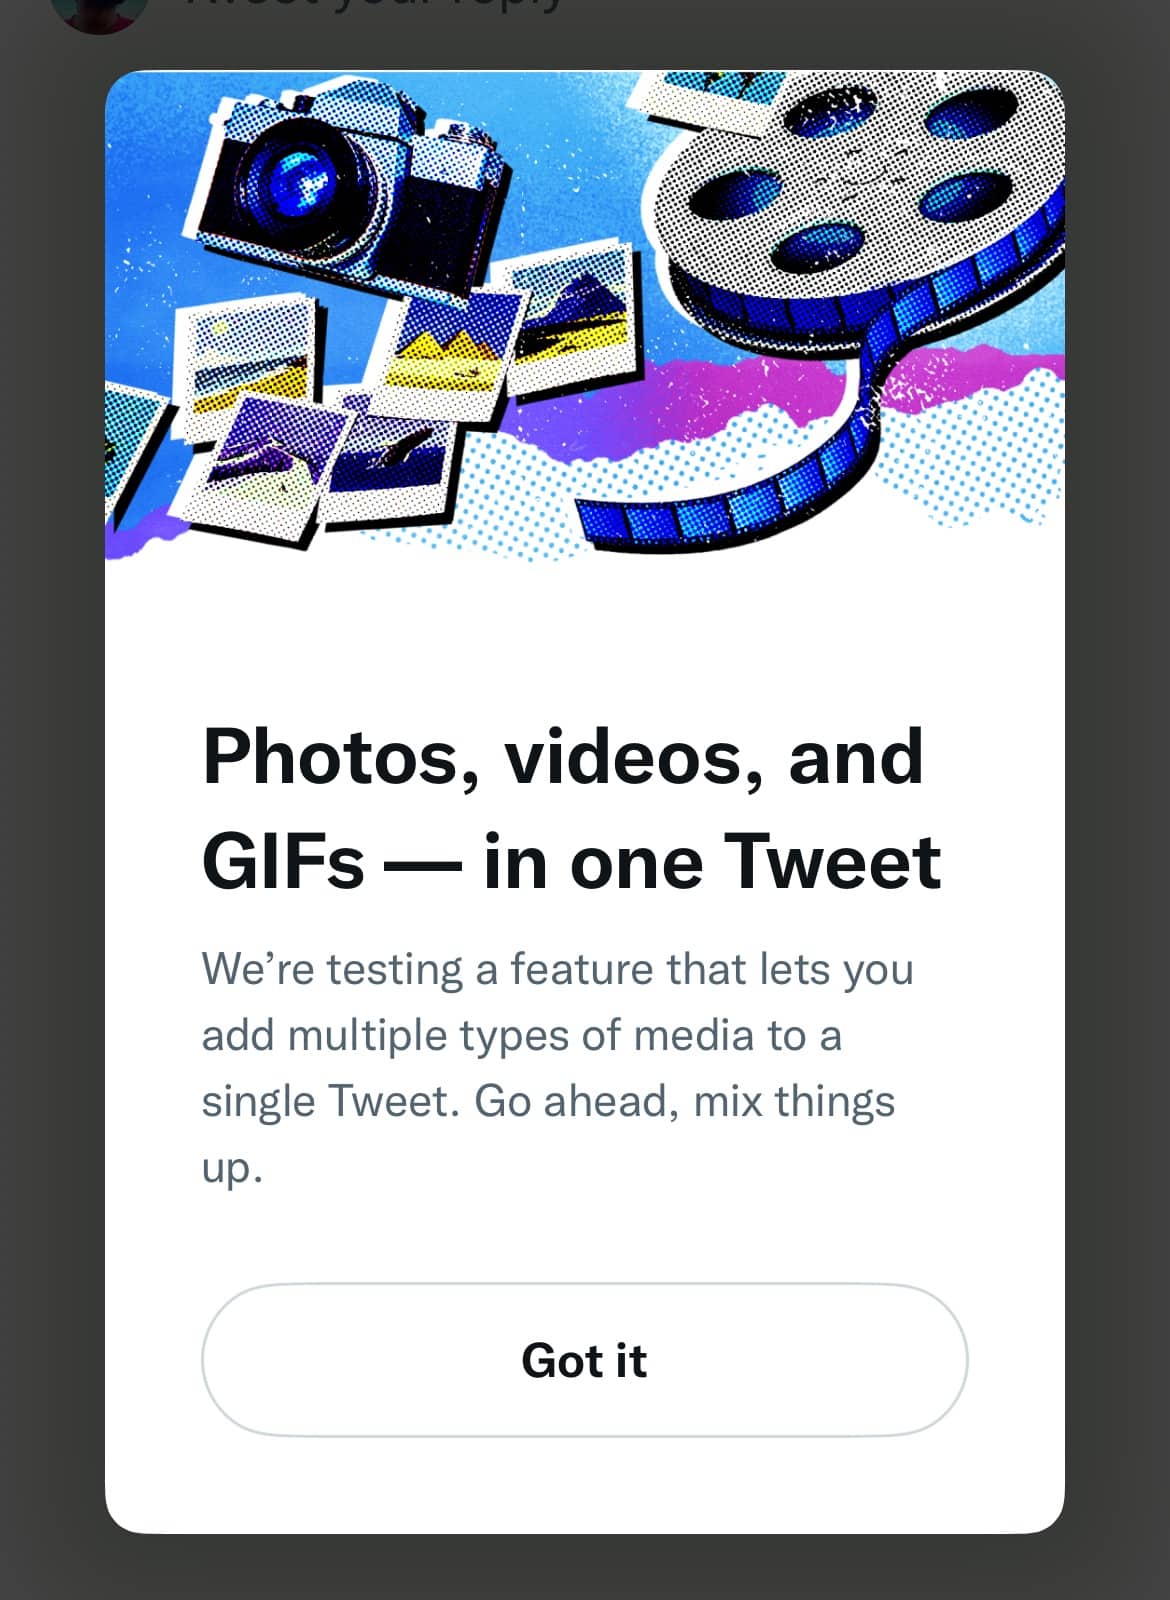 Photos, Videos, and GIFs in a single tweet popup on Twitter